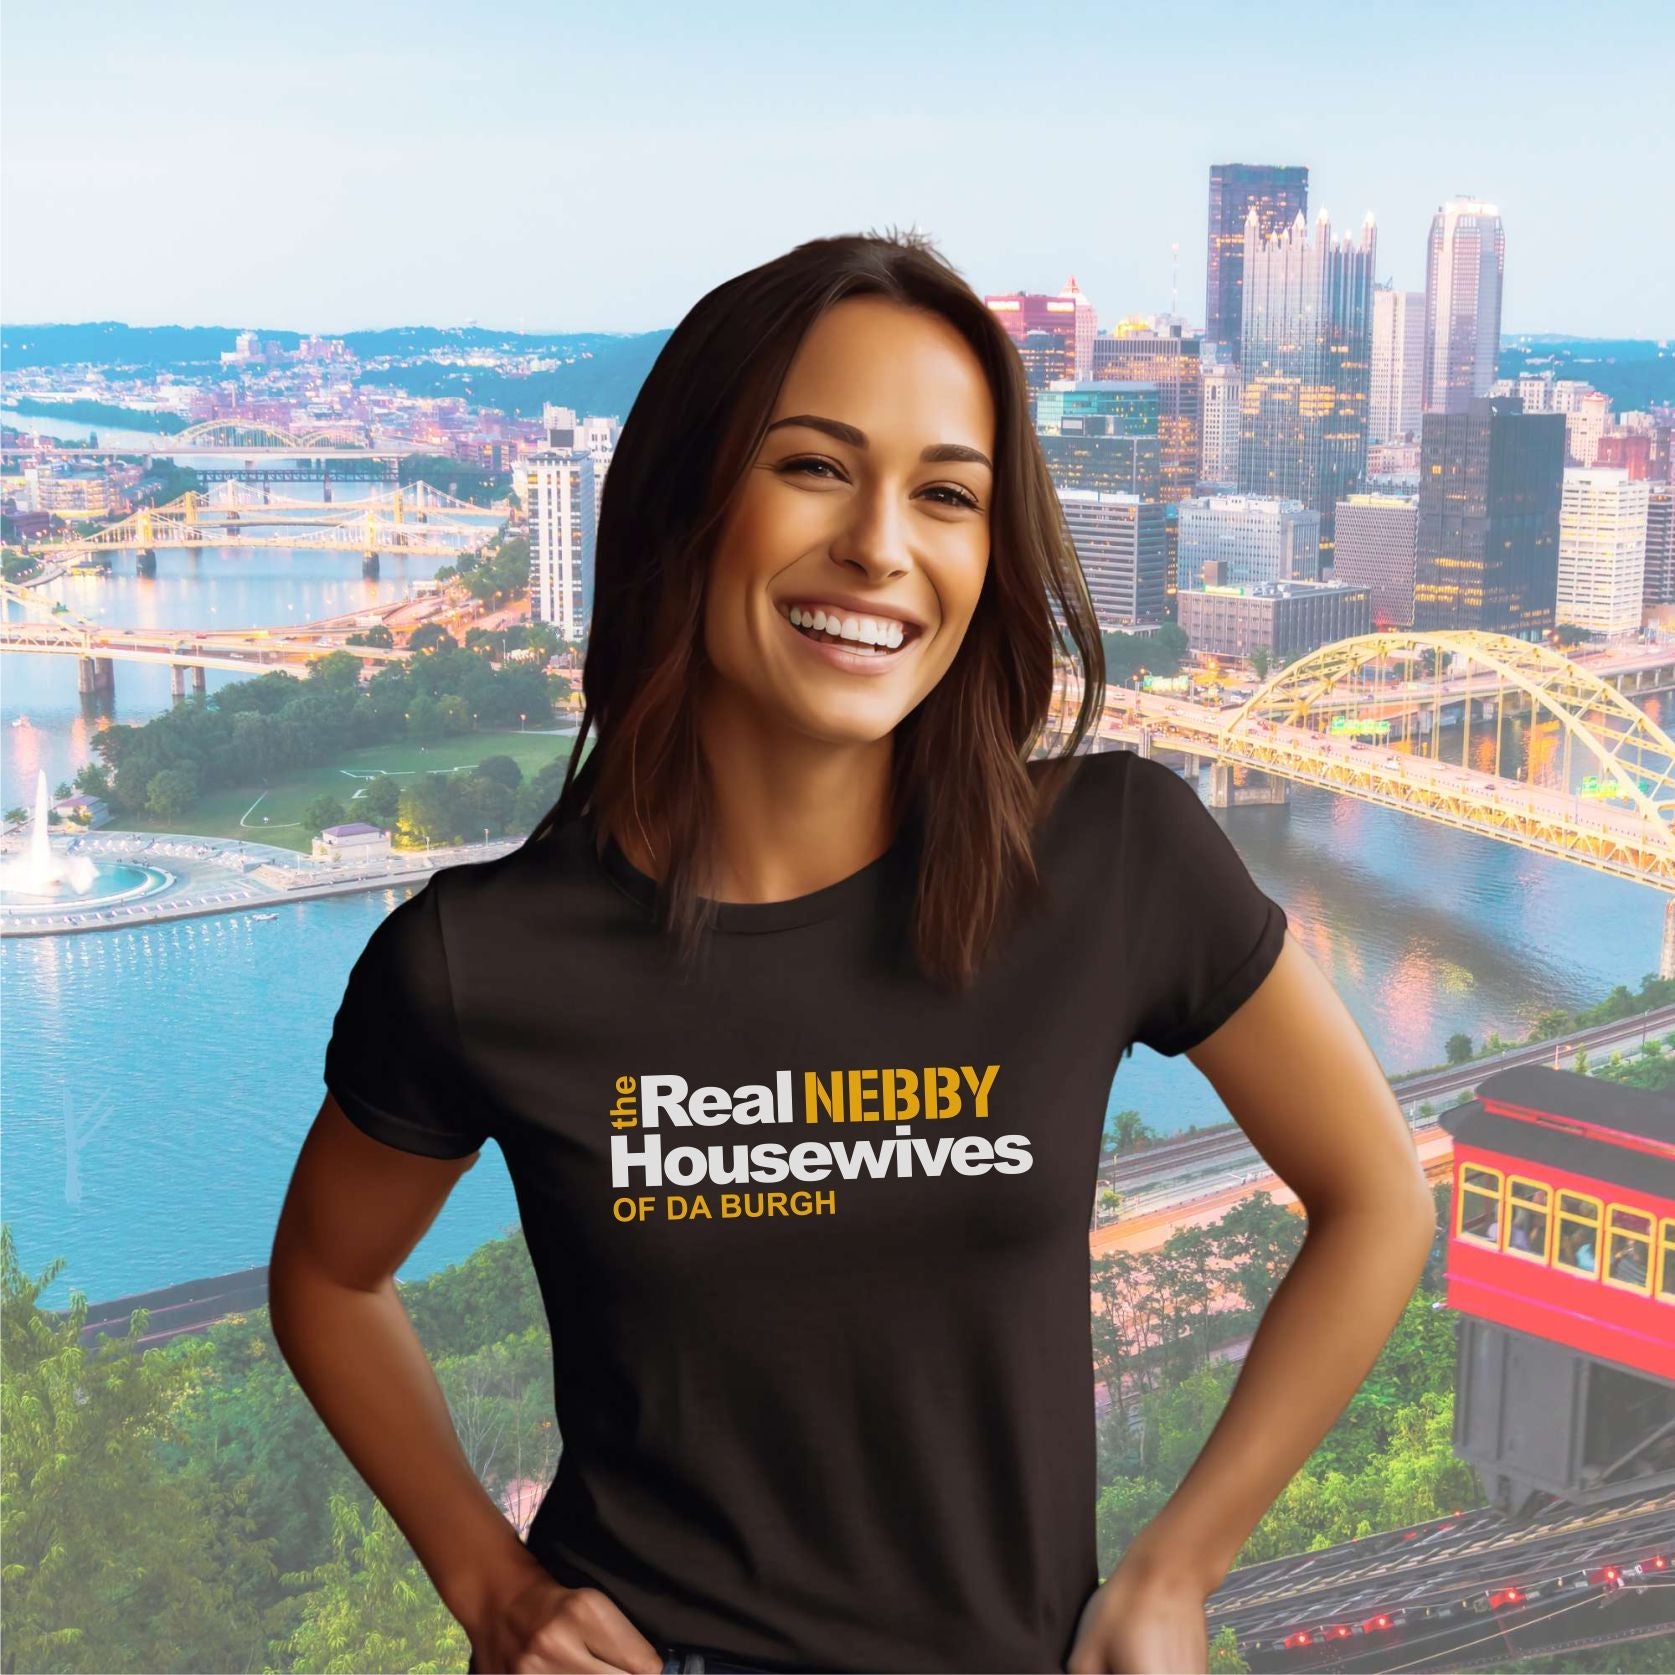 The Real NEBBY Housewives of da Burgh T shirt - SBS T Shop